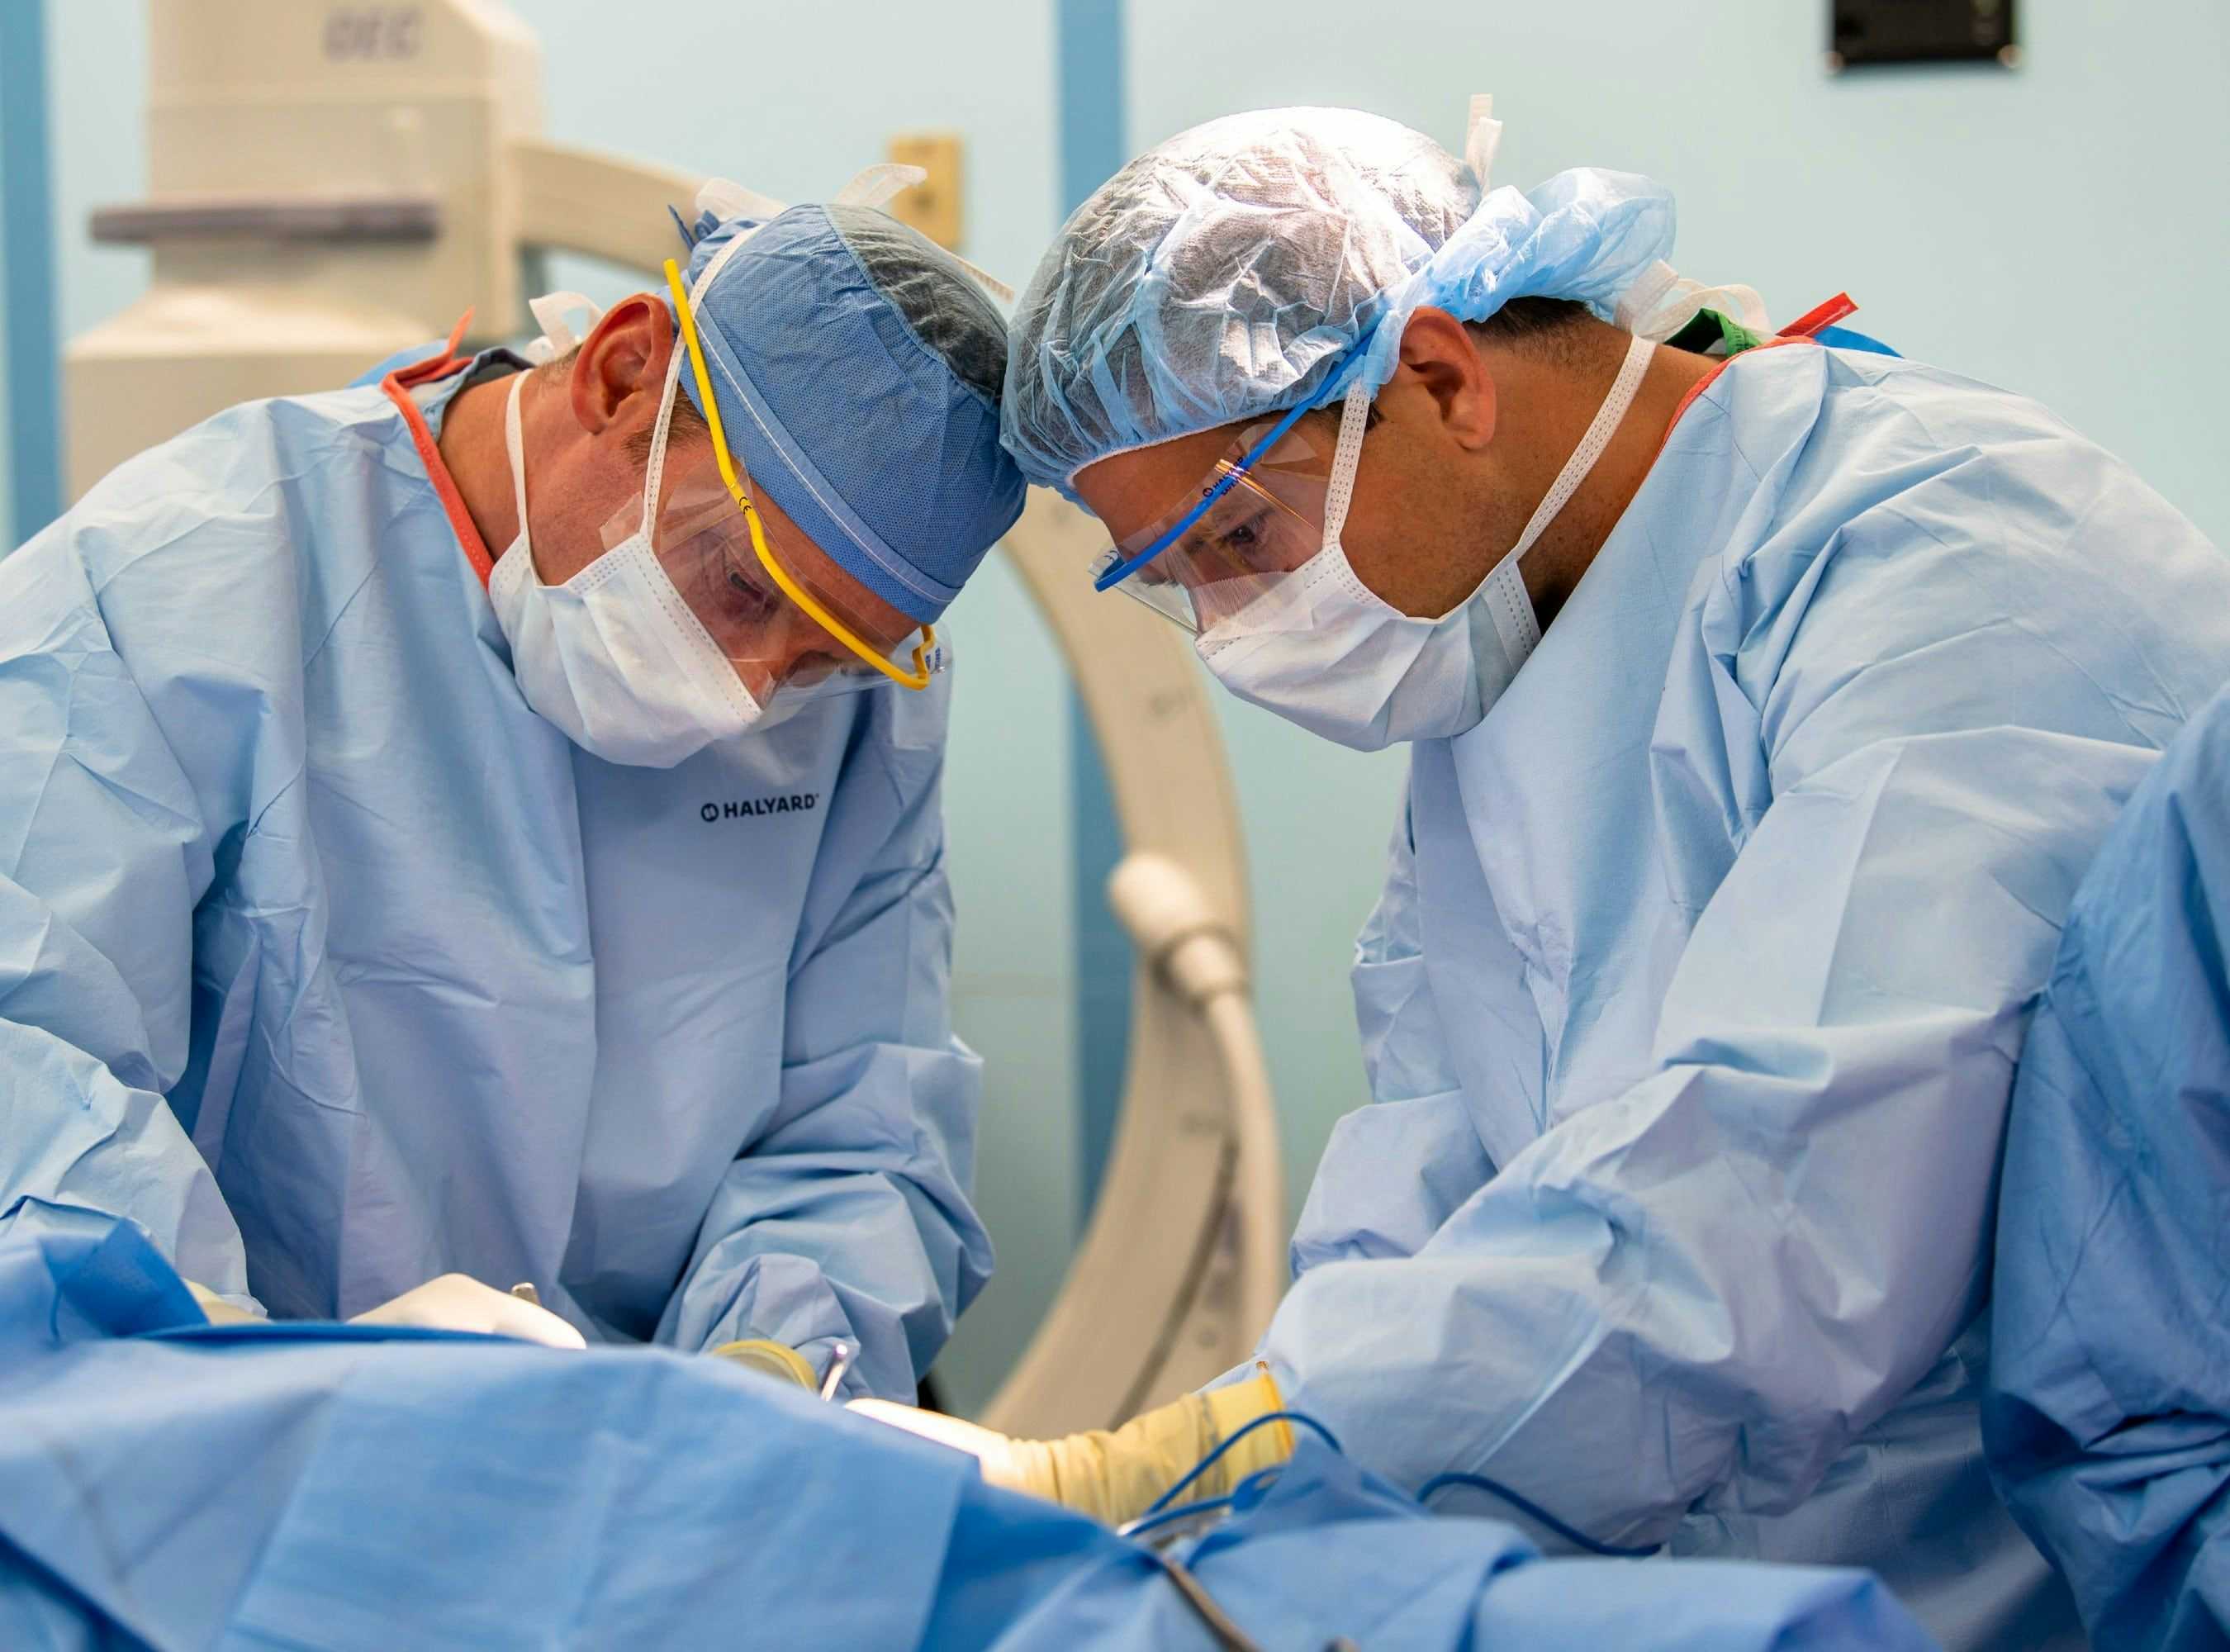 Hernia Expert Challenged for Lack of Recent Experience with Procedure and Surgical Equipment